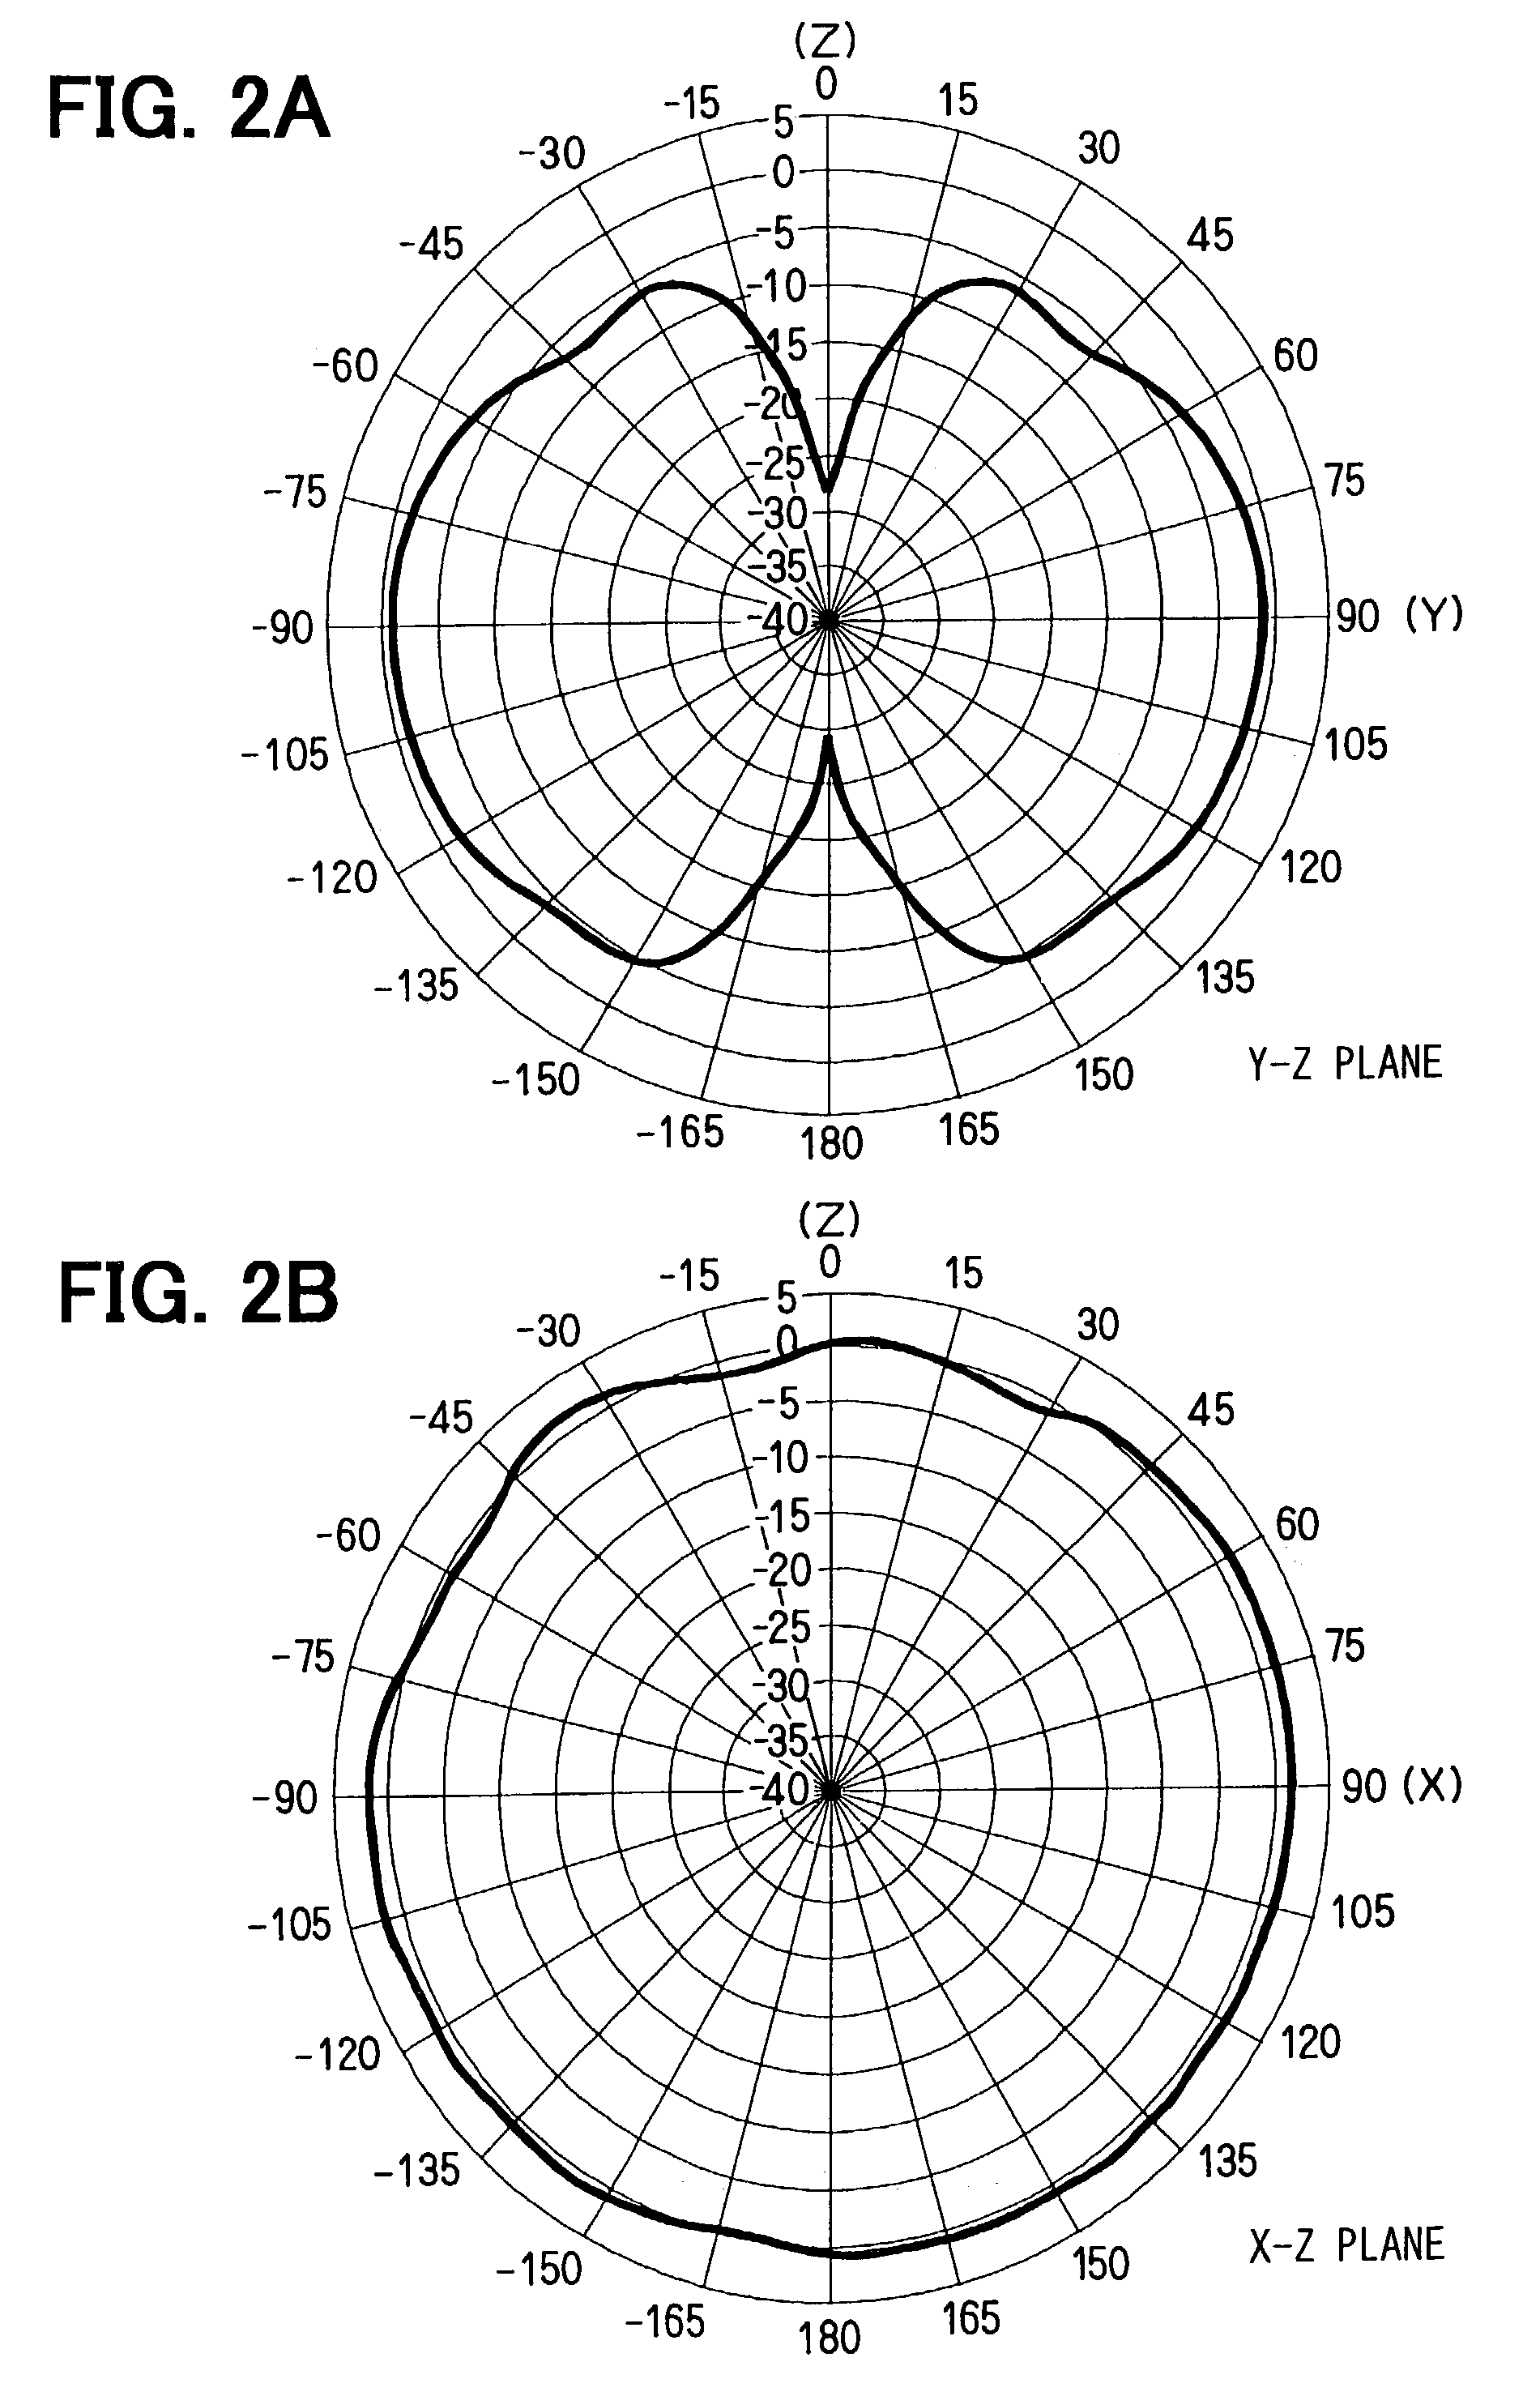 Antenna apparatus and method for mounting antenna